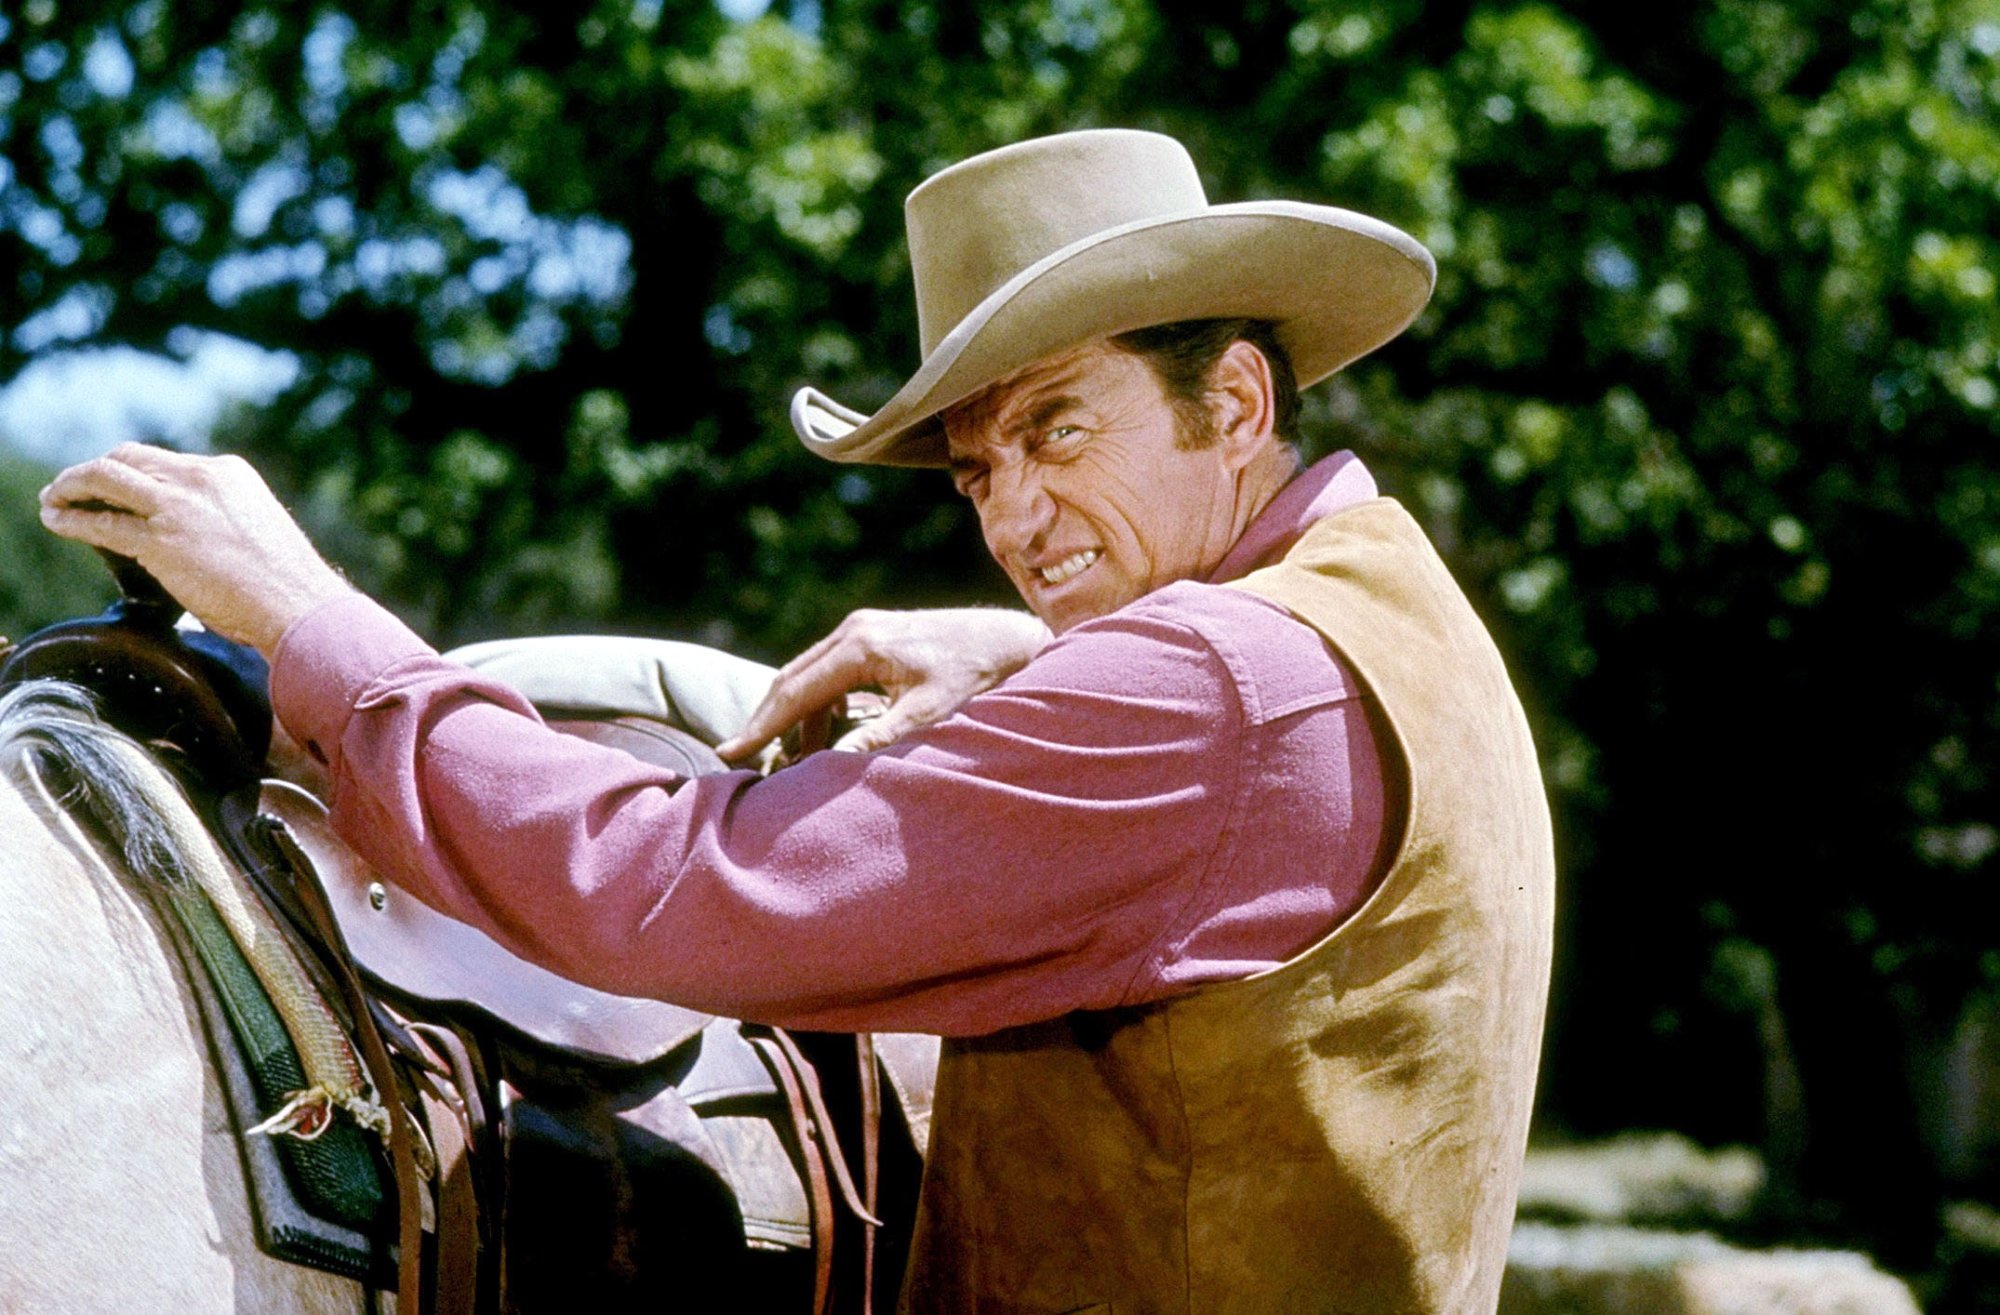 'Gunsmoke' actor James Arness as U.S. Marshal Matt Dillon with his hands on the horse saddle. His eyes are squinted, as he's looking over his shoulder wearing a tan vest and salmon shirt